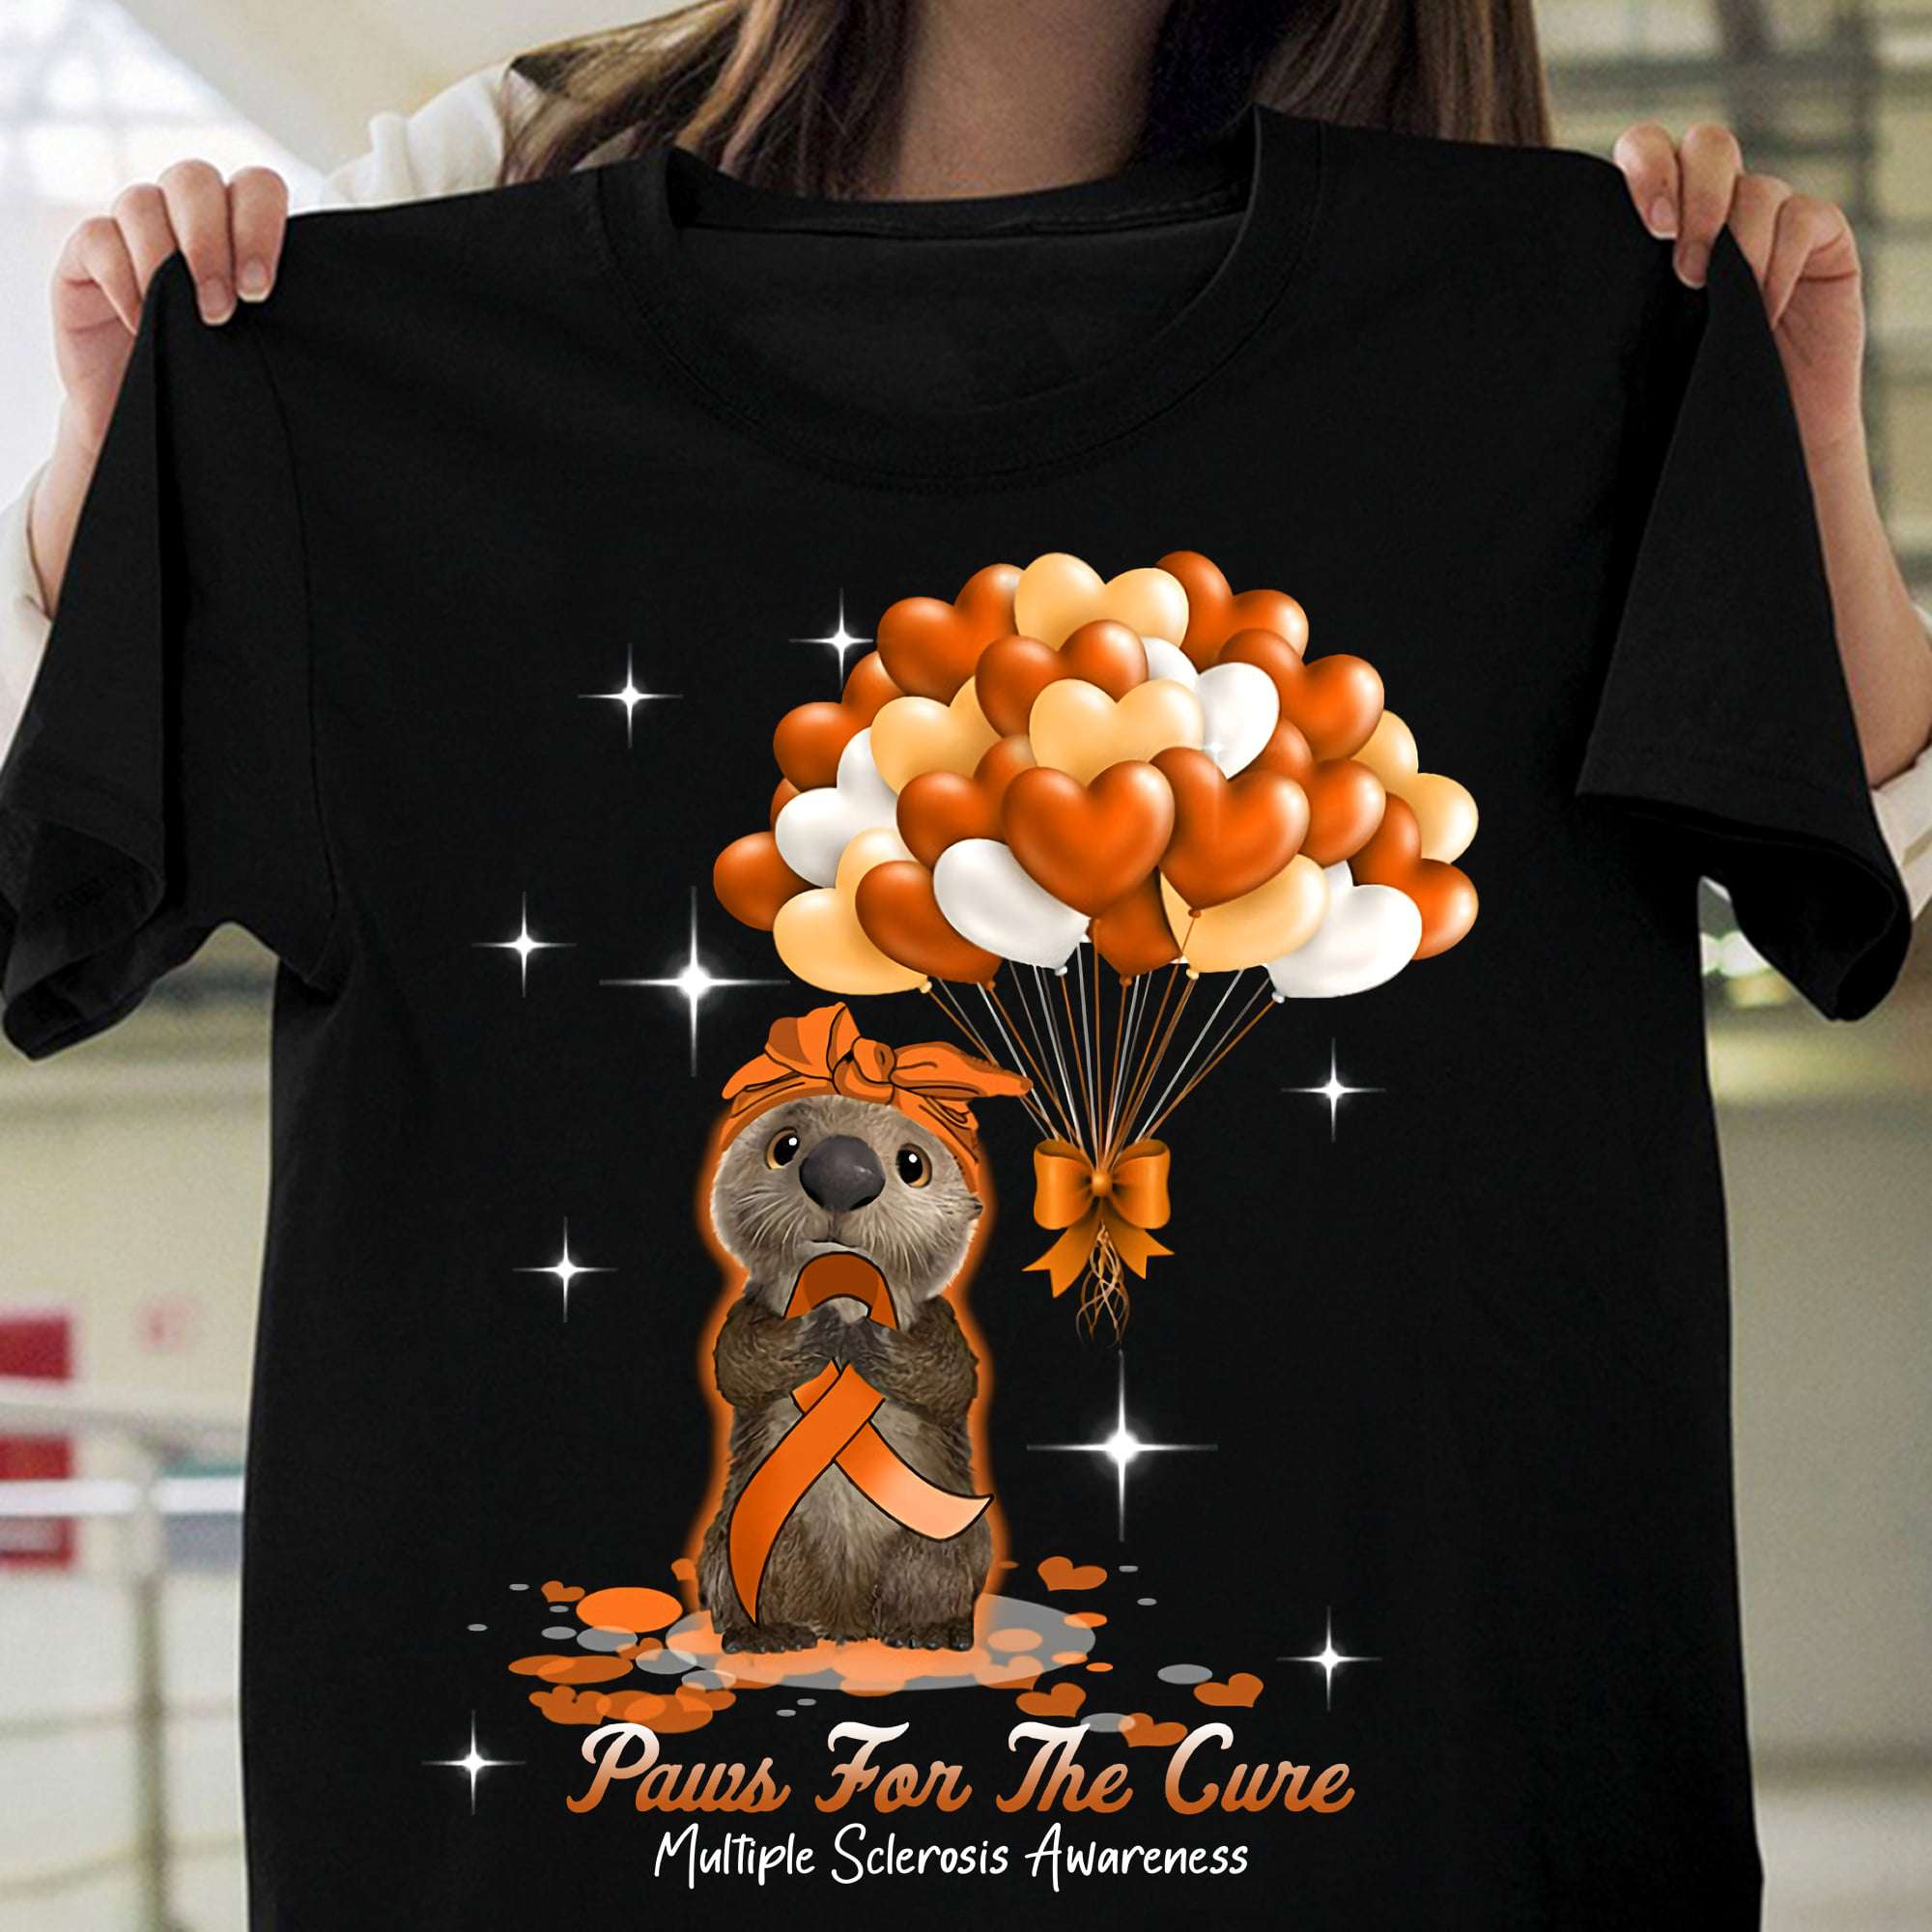 Paws for the cure - Multiple sclerosis awareness, otter multiple sclerosis